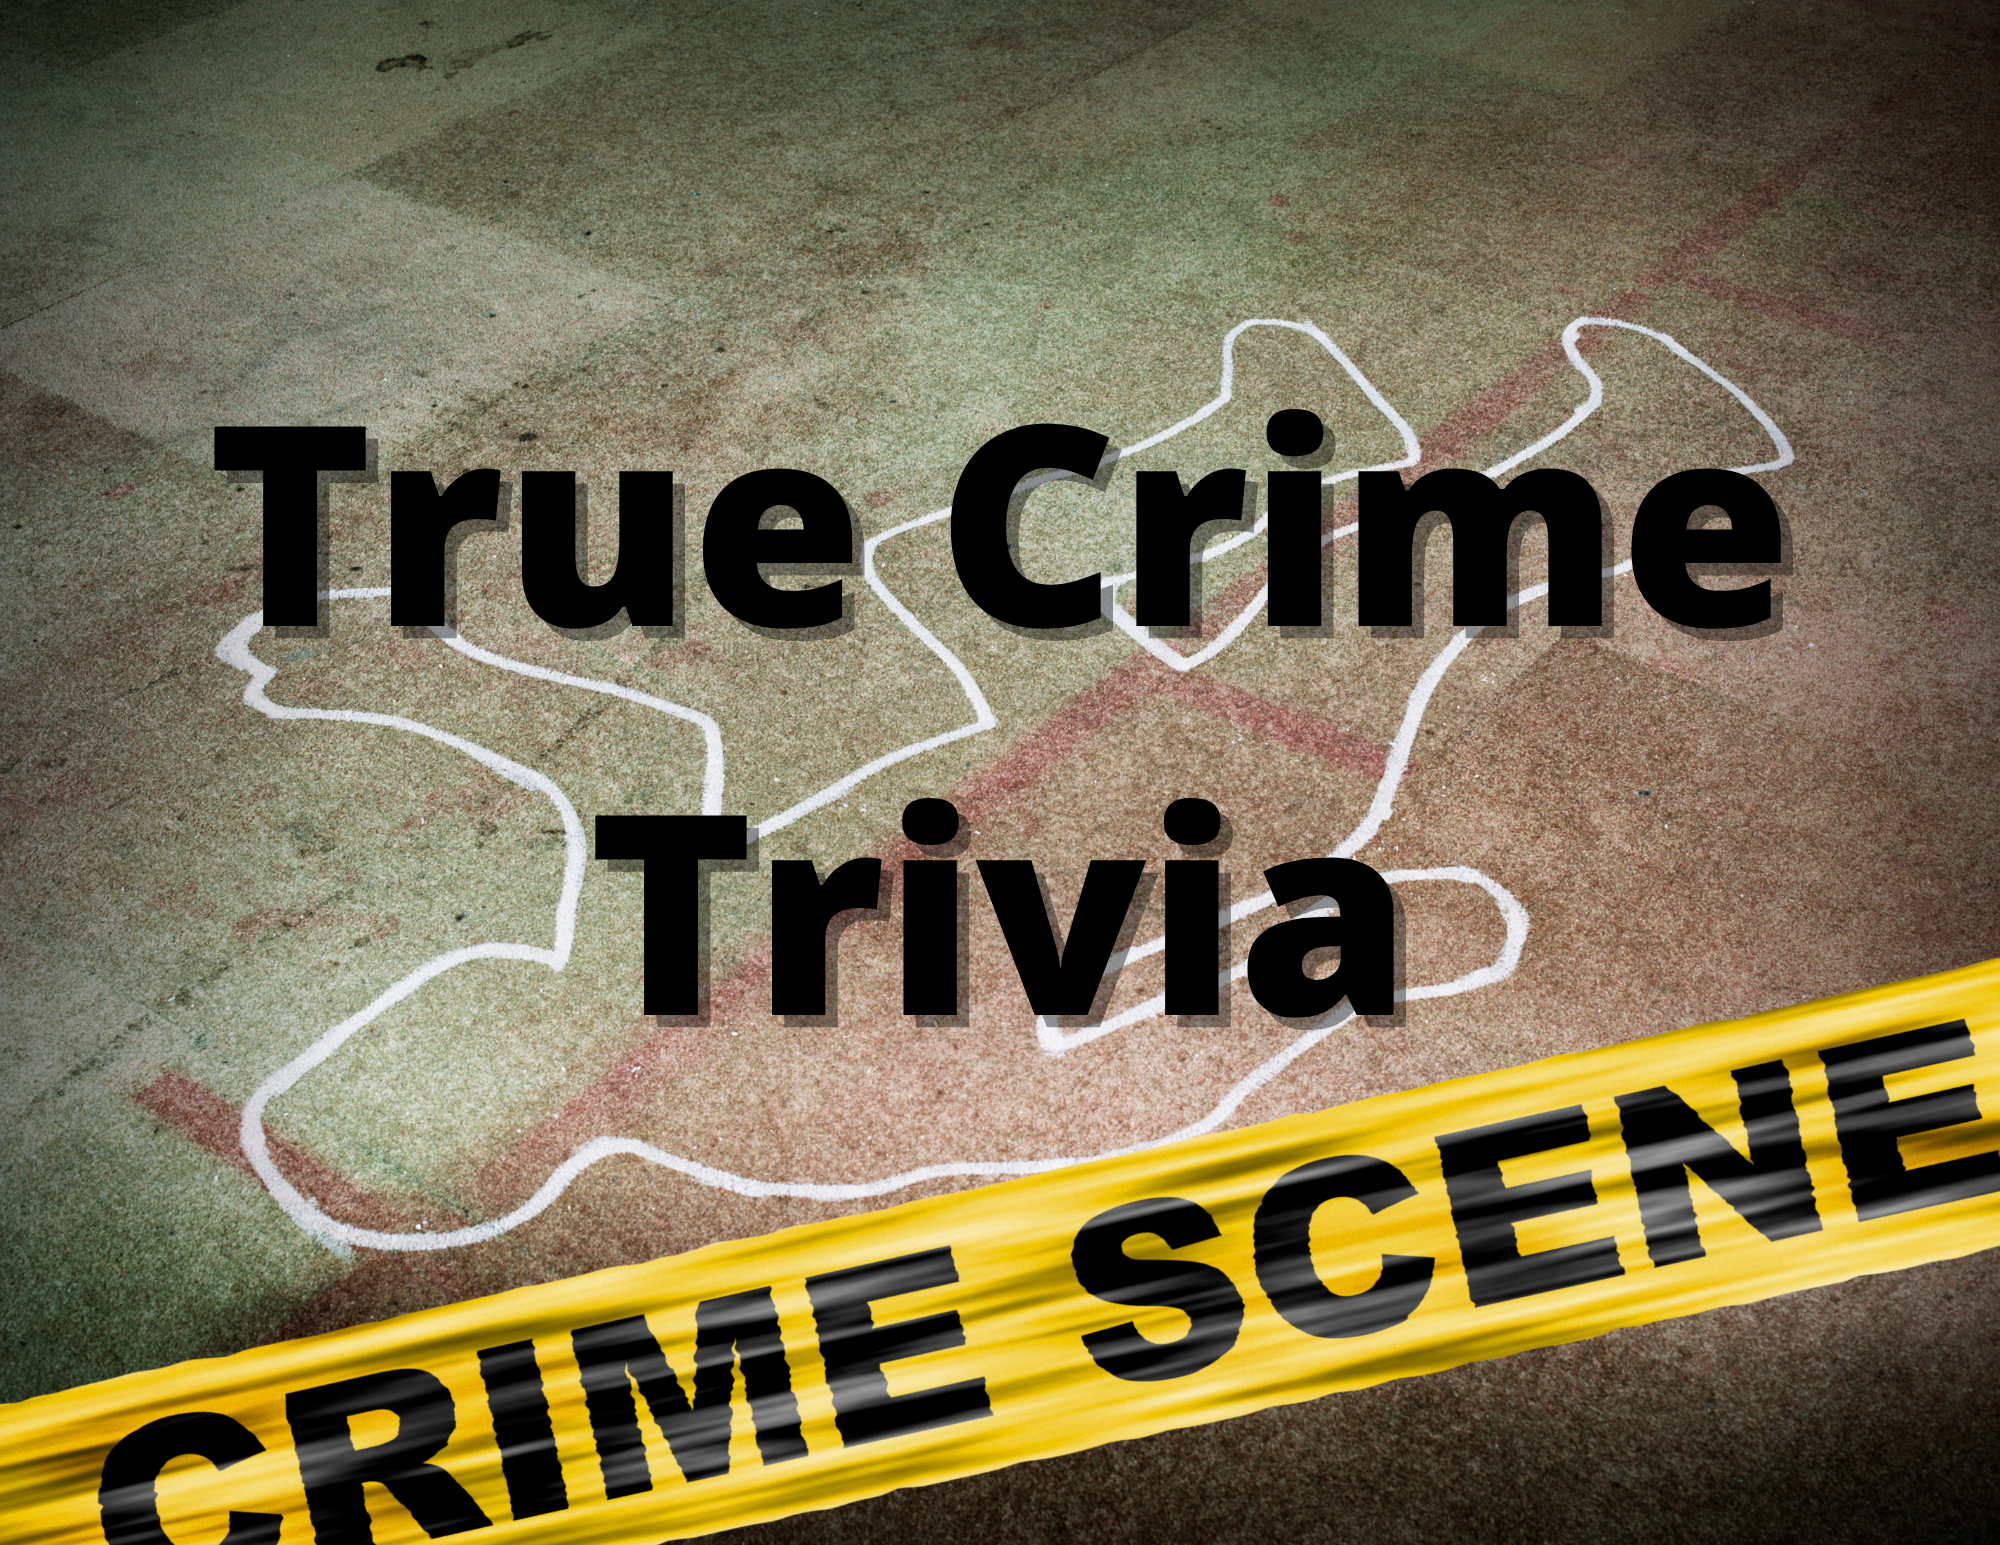 True Crime Trivia spelled out in black letters against crime scene with body marking and yellow crime scene tape with black letters saying Crime Scene.